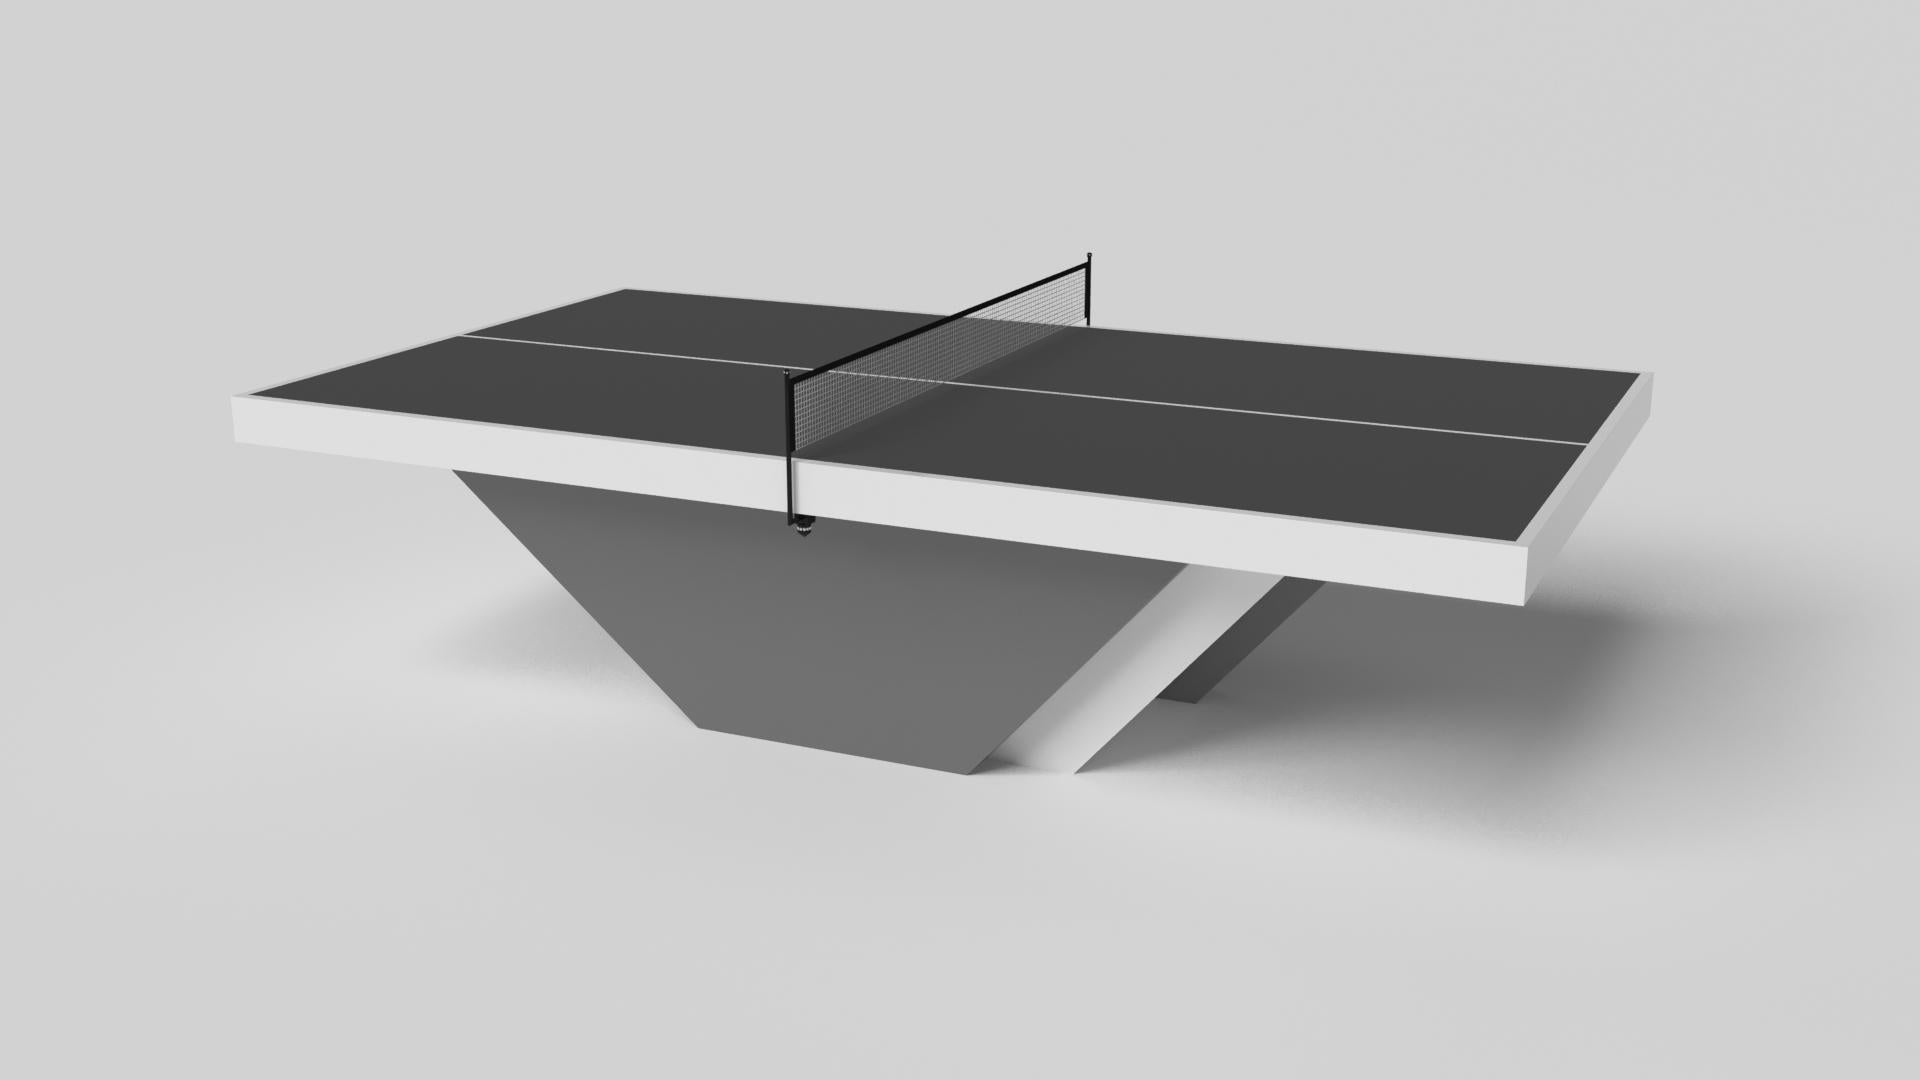 Handcrafted with clean lines, sharp angles, and a pyramid base, the Vogue table tennis table in chrome with black strikes the perfect balance between sport-inspired style and contemporary design. Timeless in its appeal and revered for its